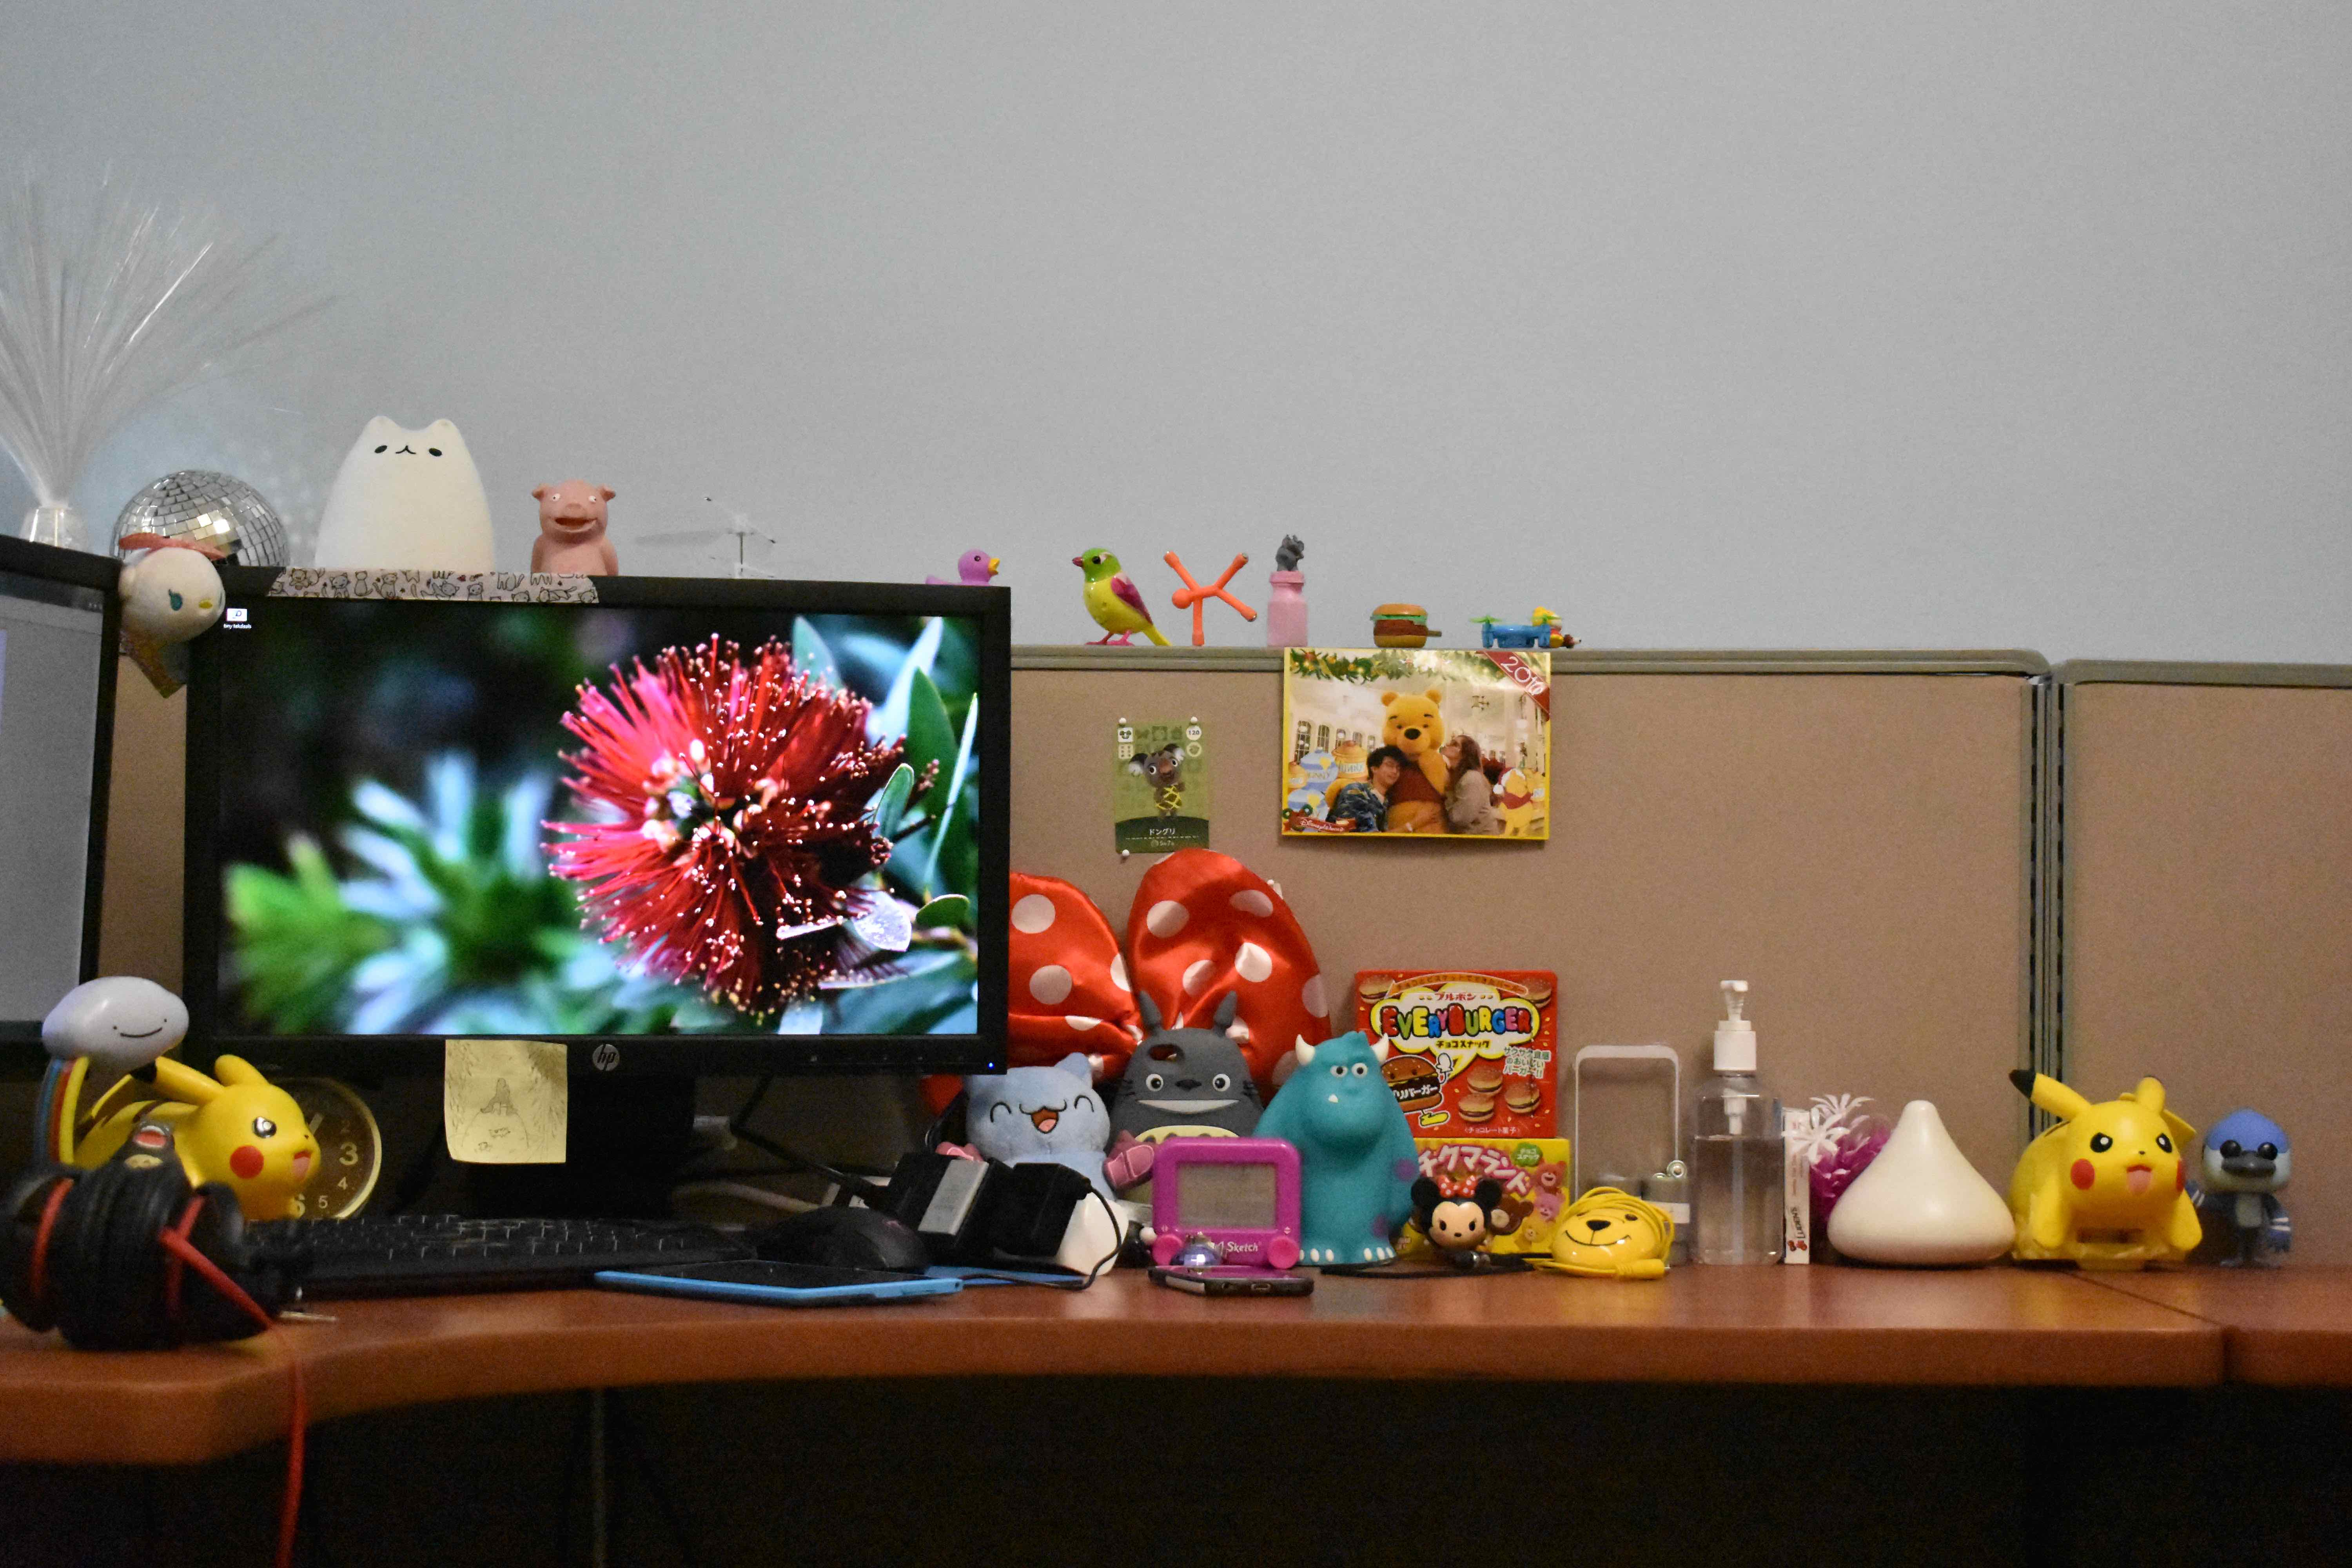 Deskscaping - Try It! - The Cougar Chronicle